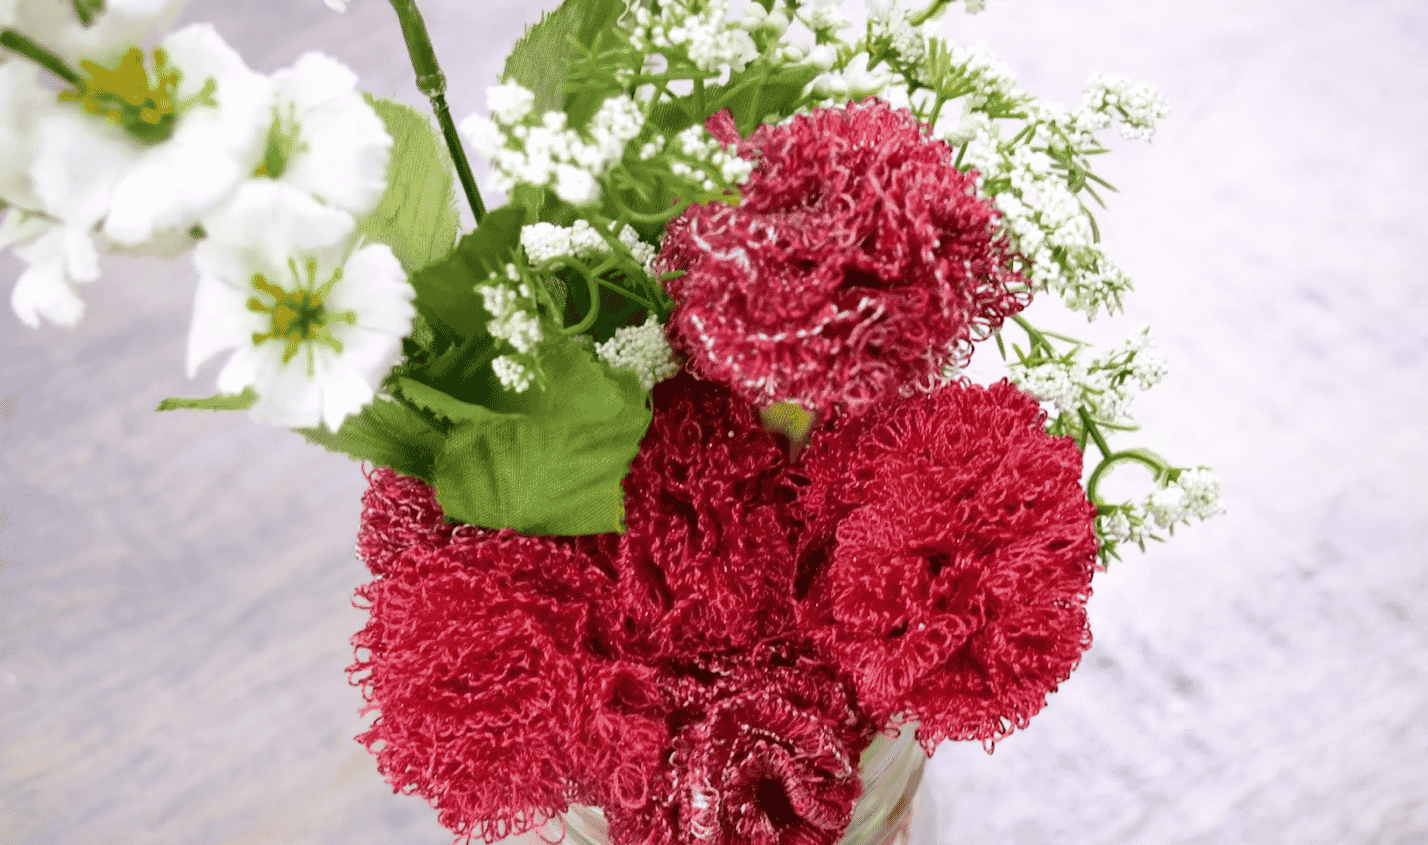 A bouquet of red flowers

Description automatically generated with medium confidence